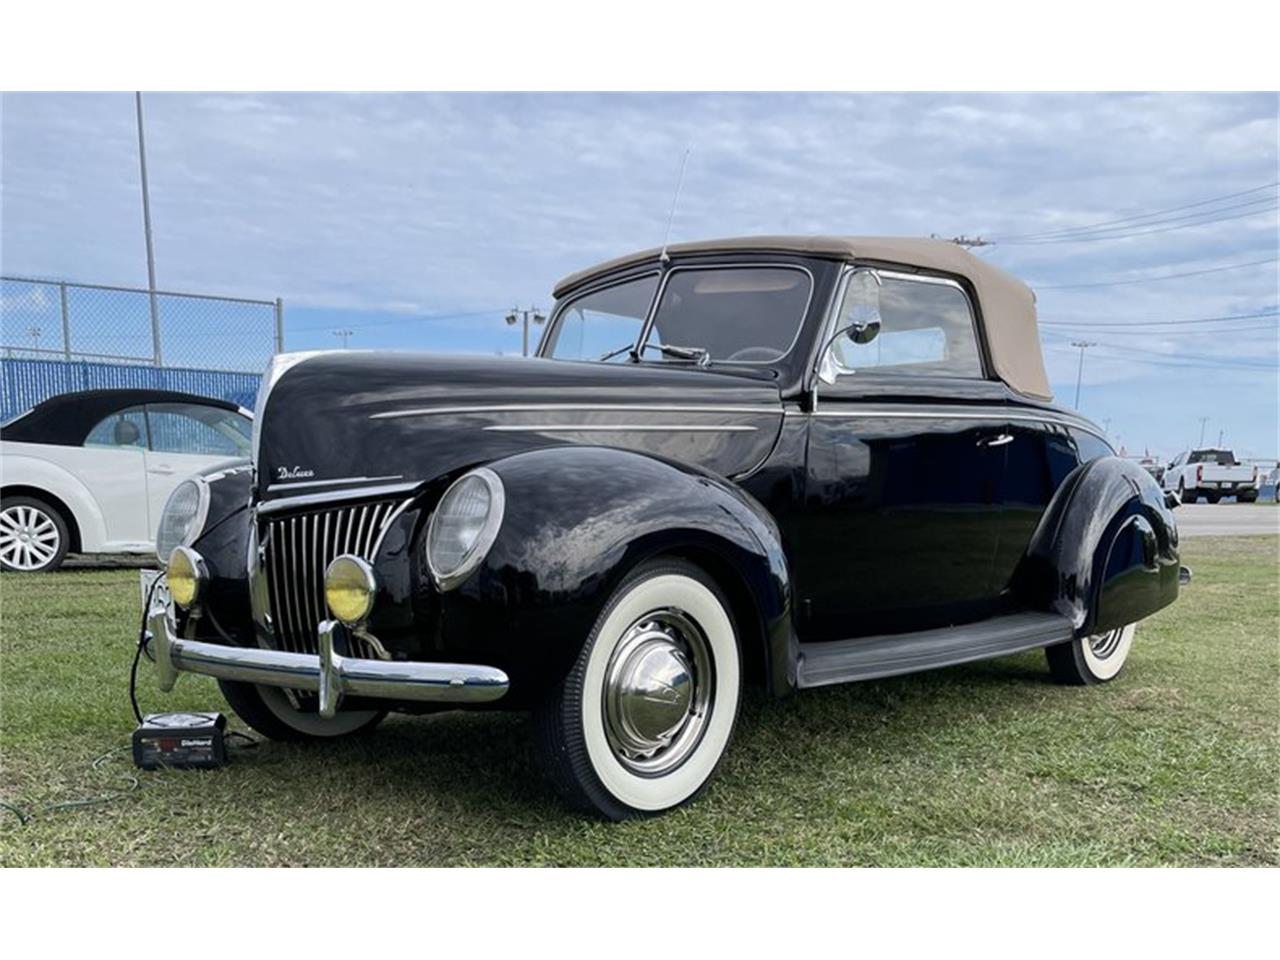 For Sale at Auction: 1939 Ford Deluxe in Punta Gorda, Florida for sale in Punta Gorda, FL